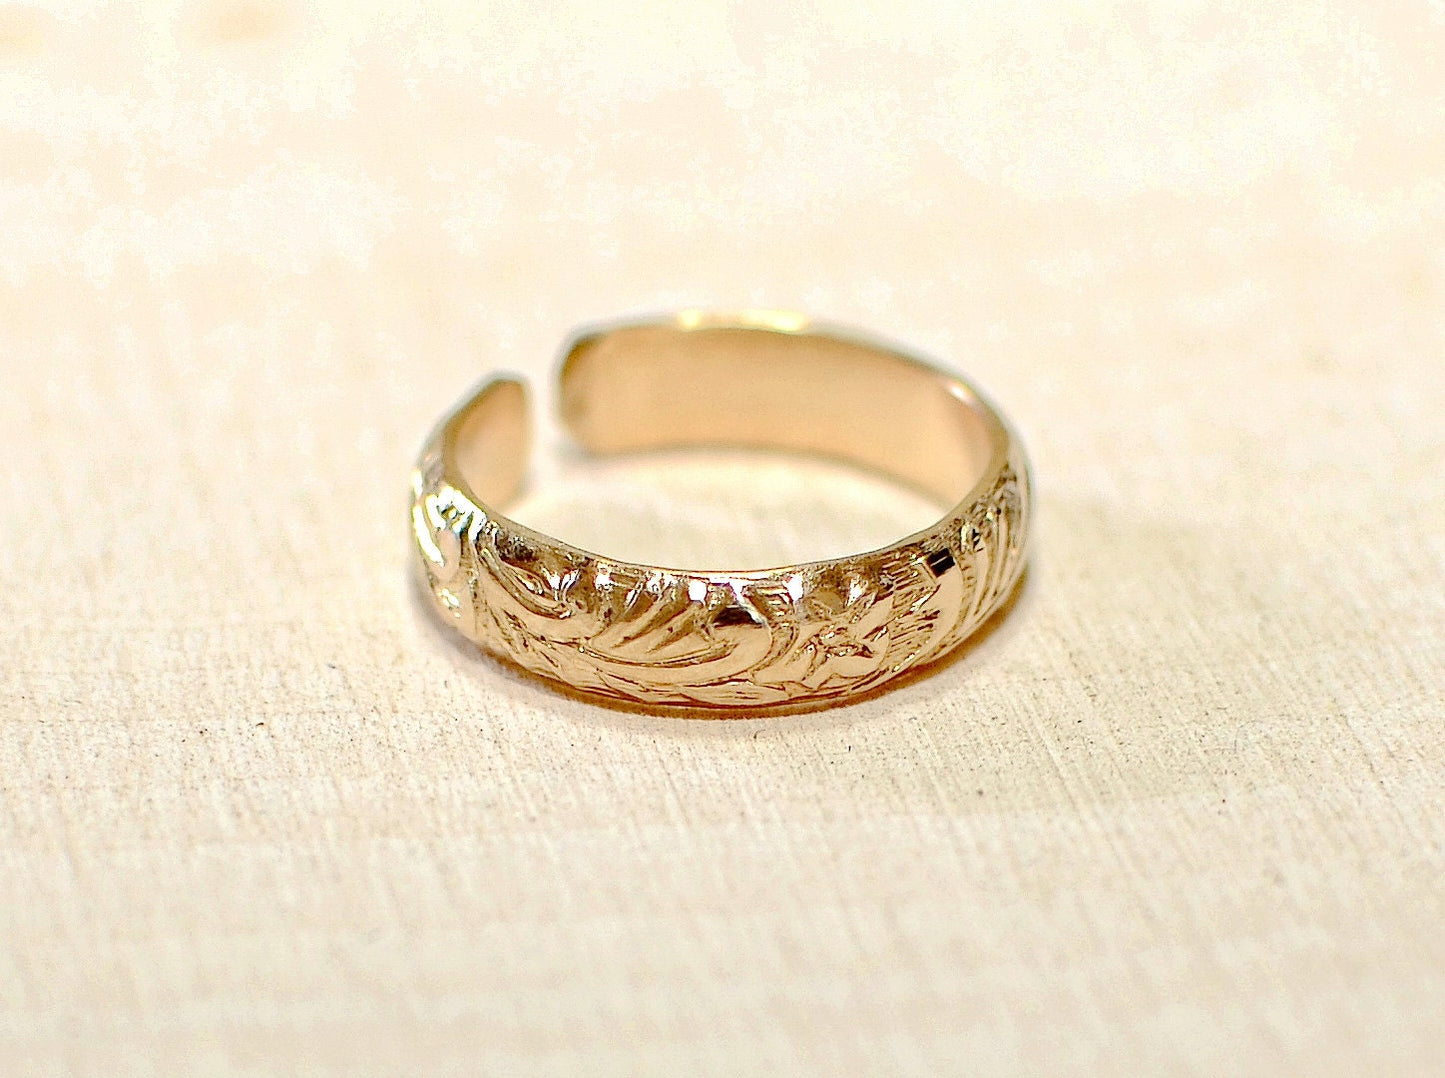 Gold Toe Ring with Organic Nature Themese